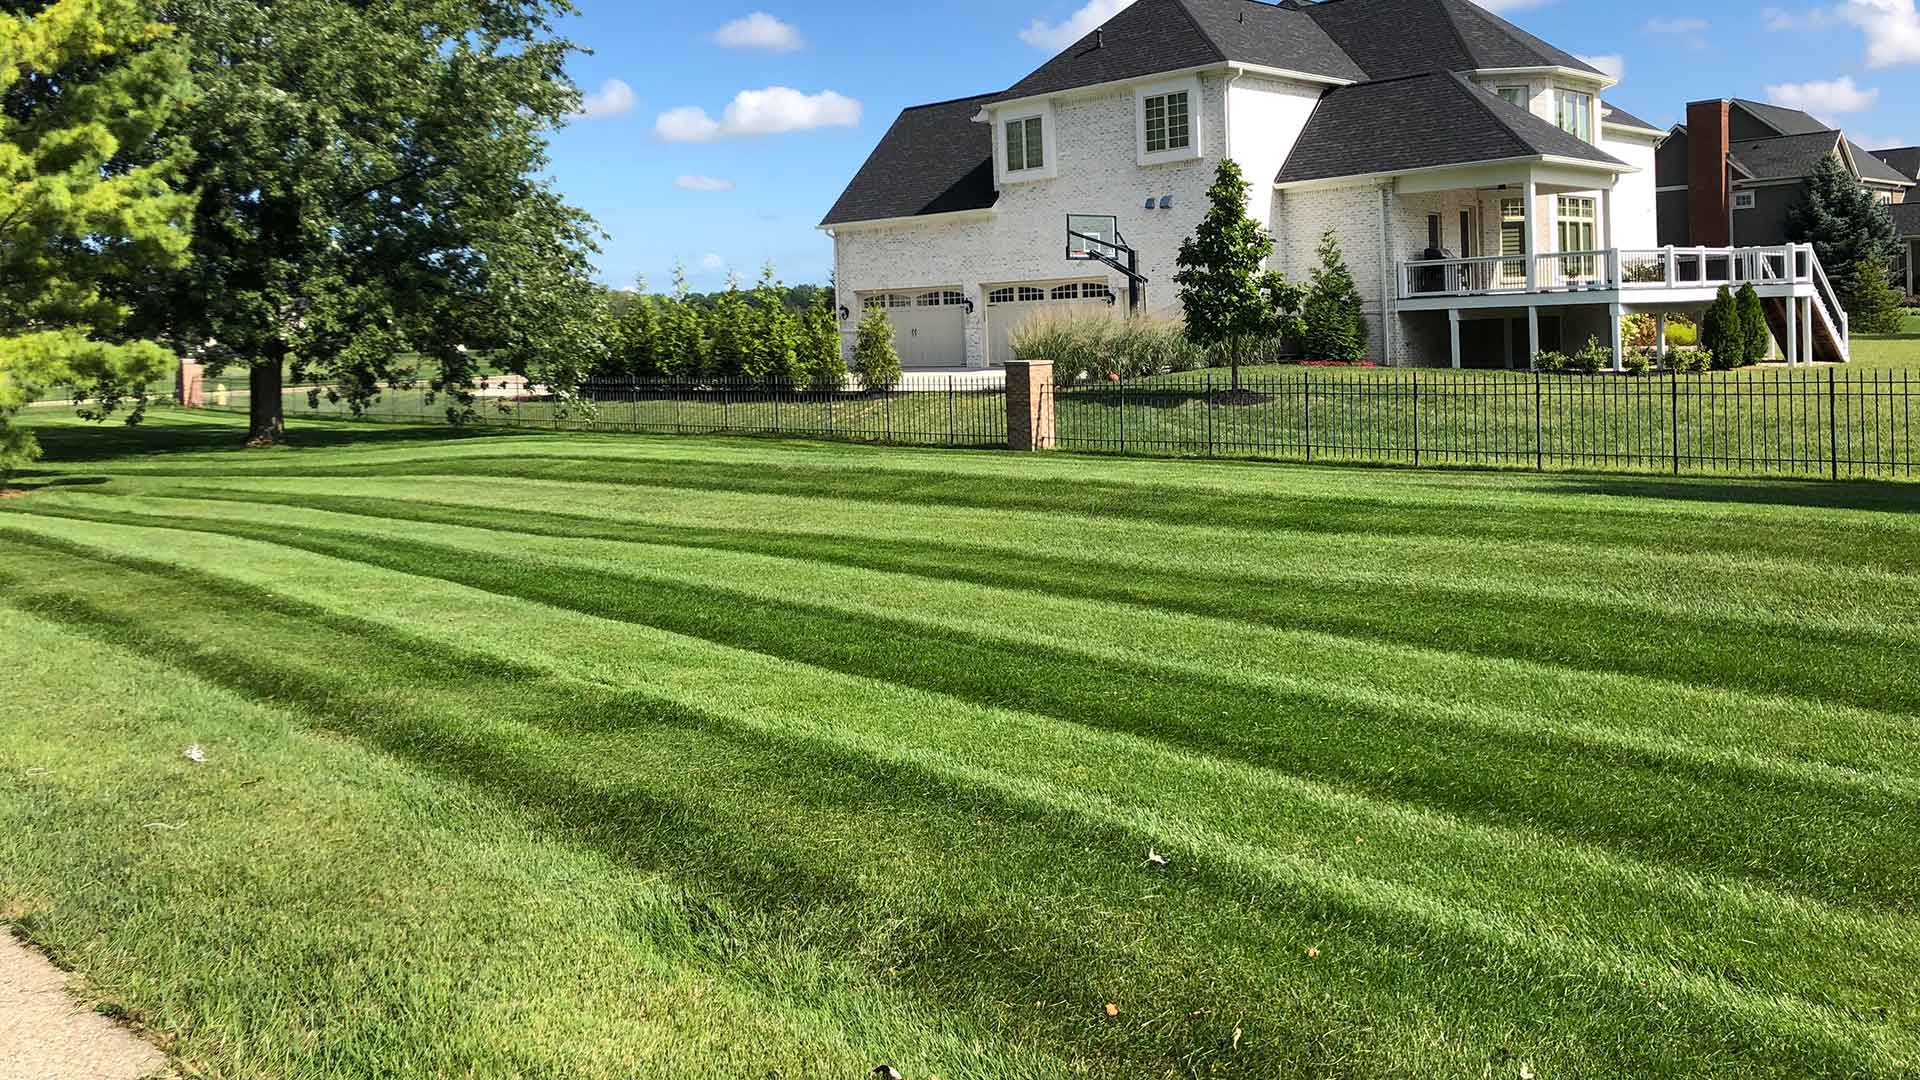 Healthy lawn with lawn mowing services in Fishers, IN.